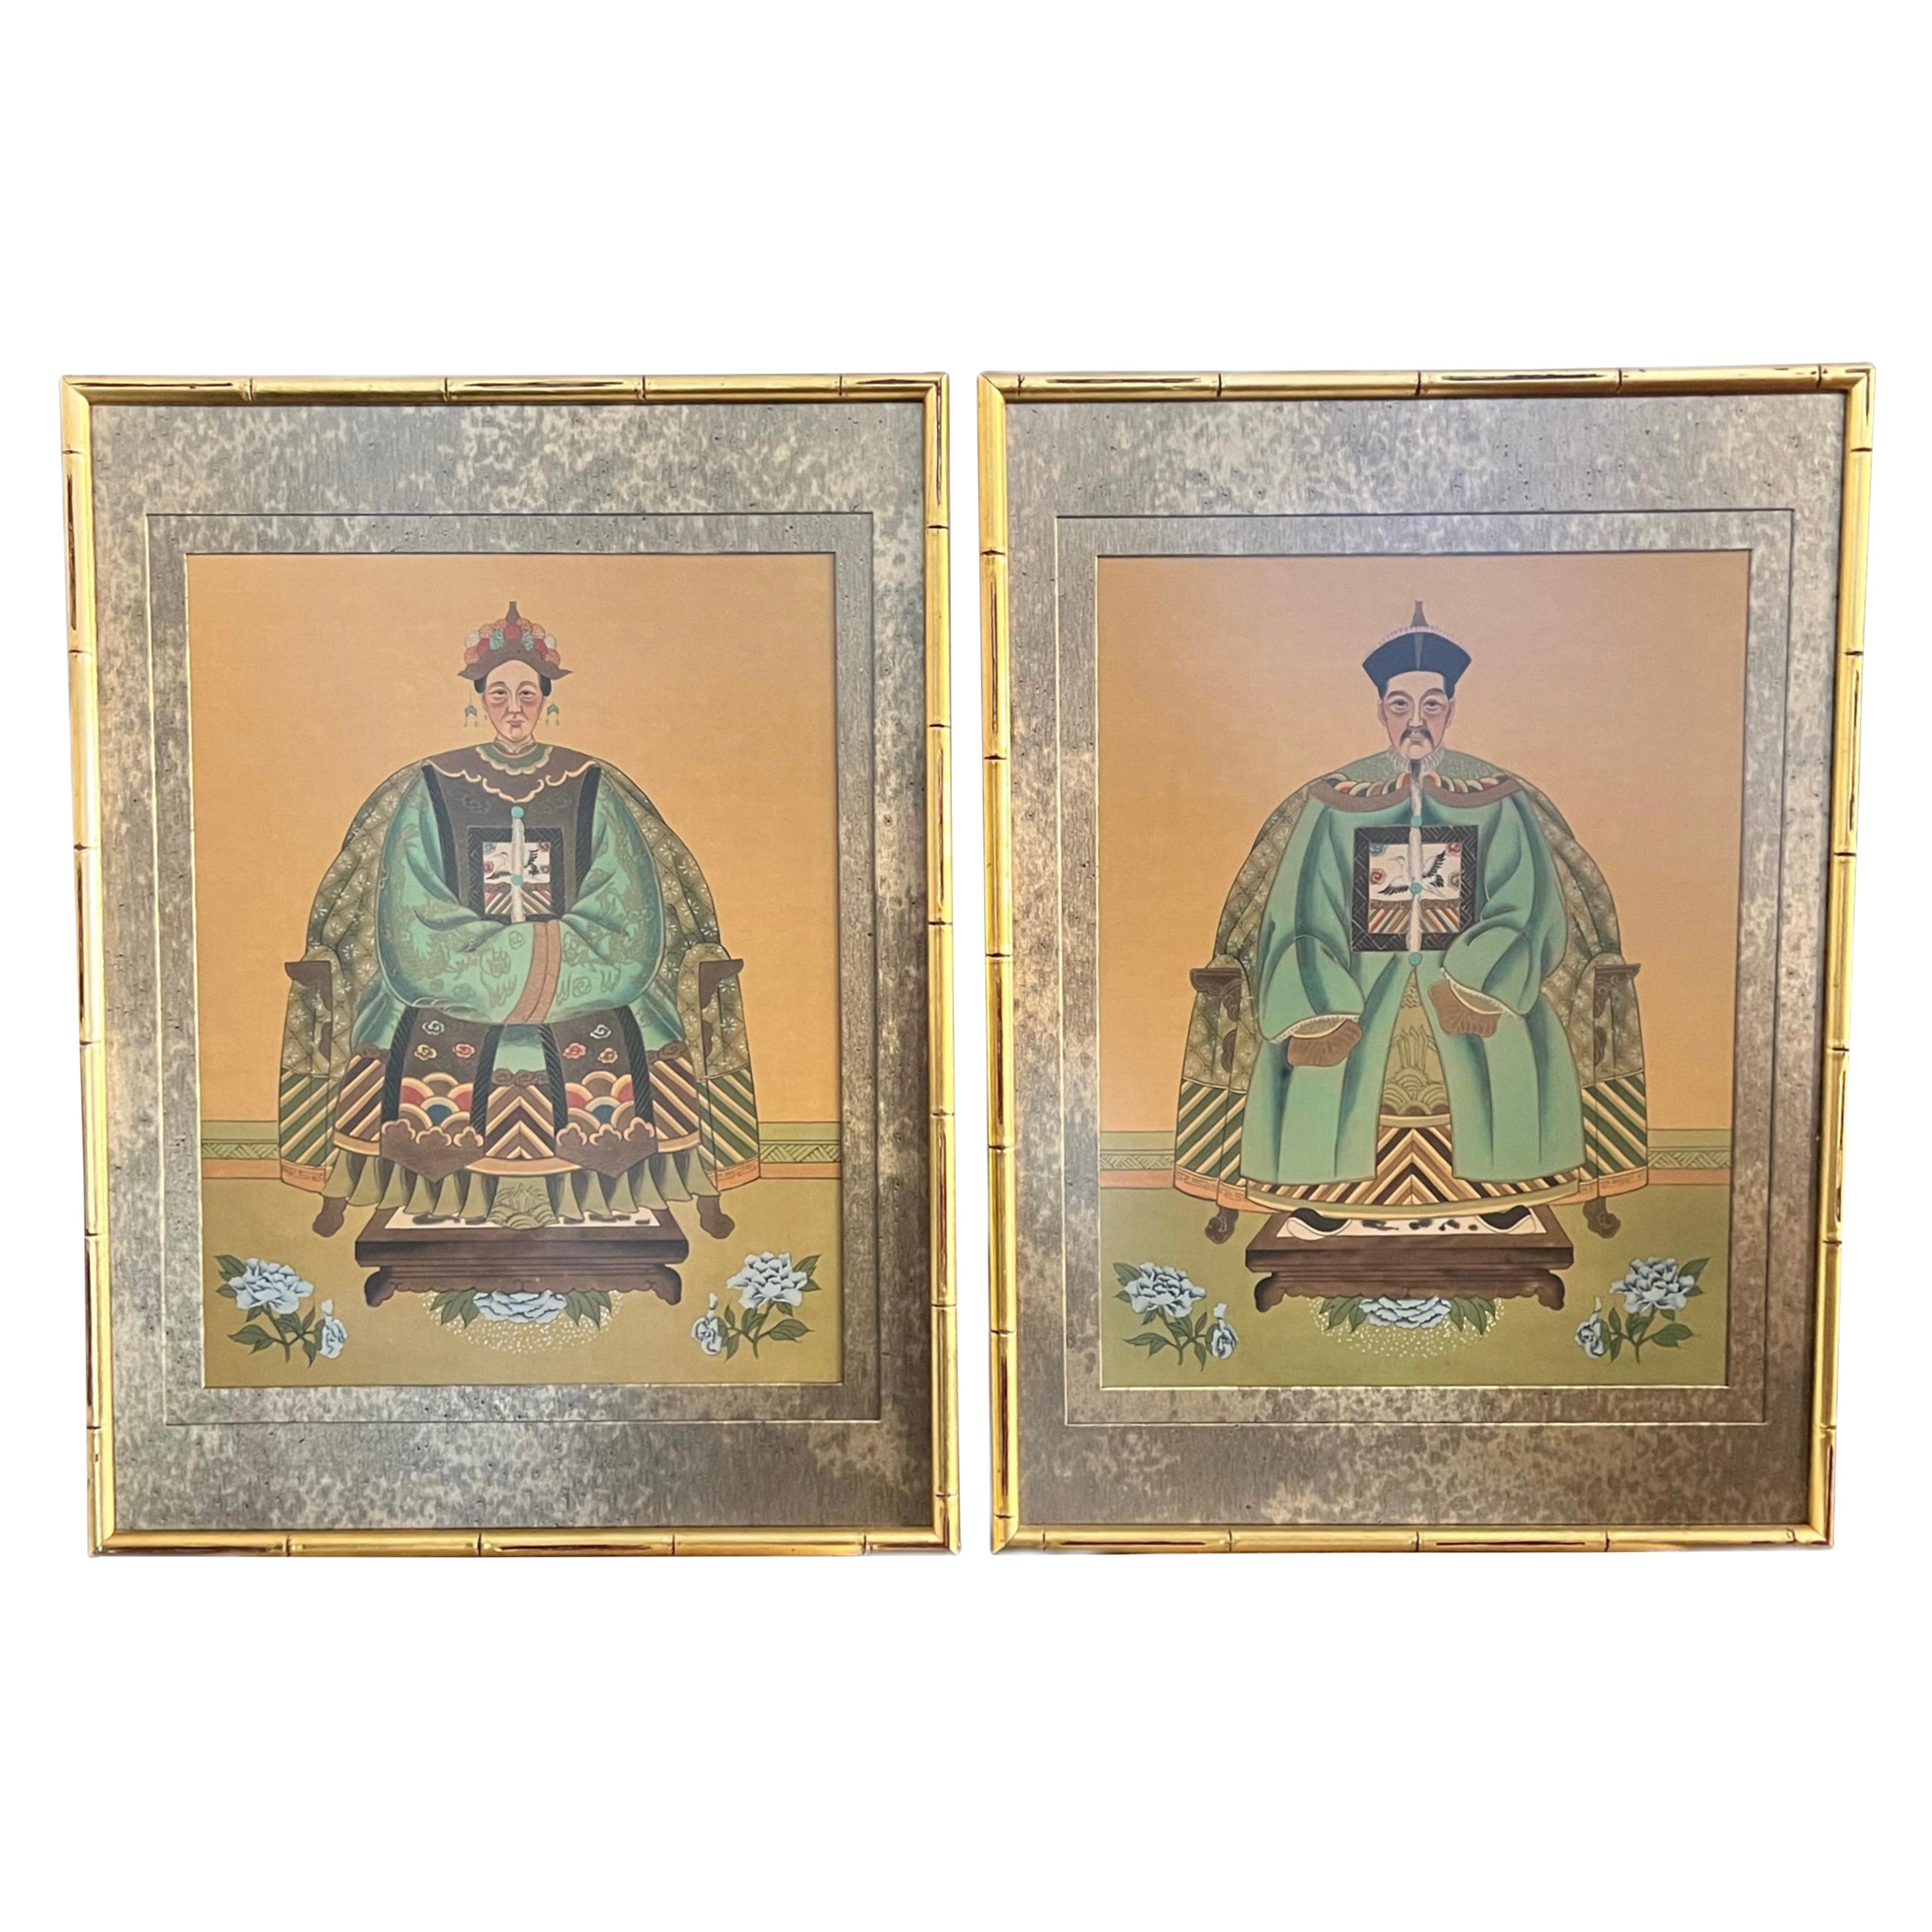 Mid 20th Century Chinese Portraits of Emperor & Empress Watercolor on Silk